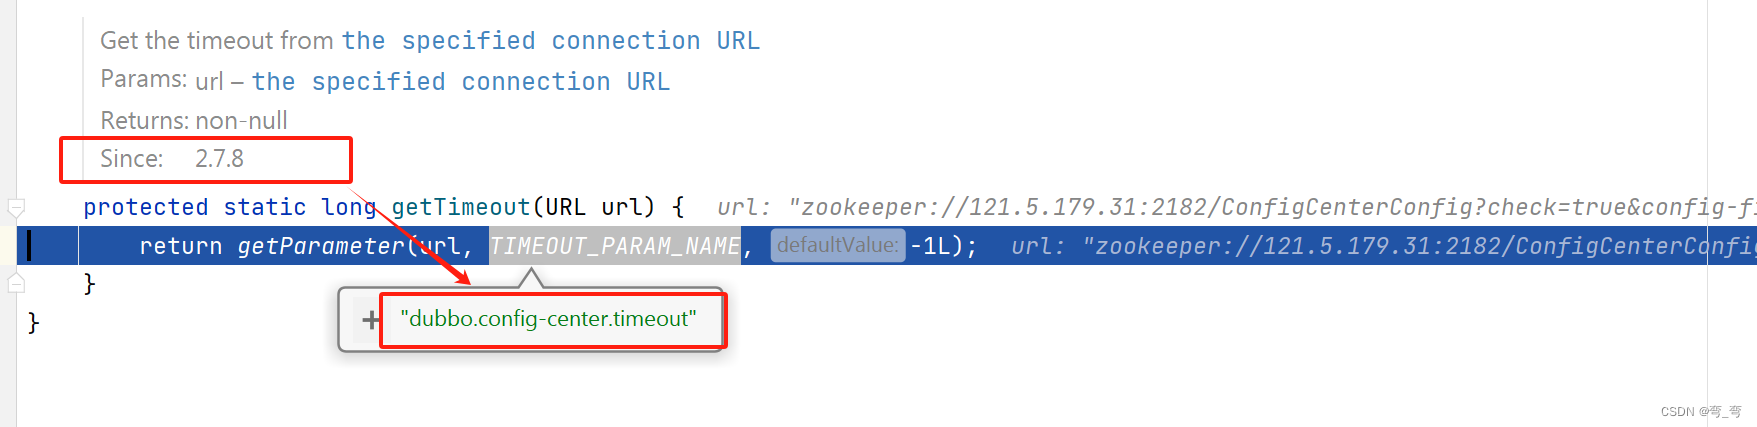 springboot 集成Dubbo2.7.8 ，连接zookeeper 提示错误 zookeeper not connected